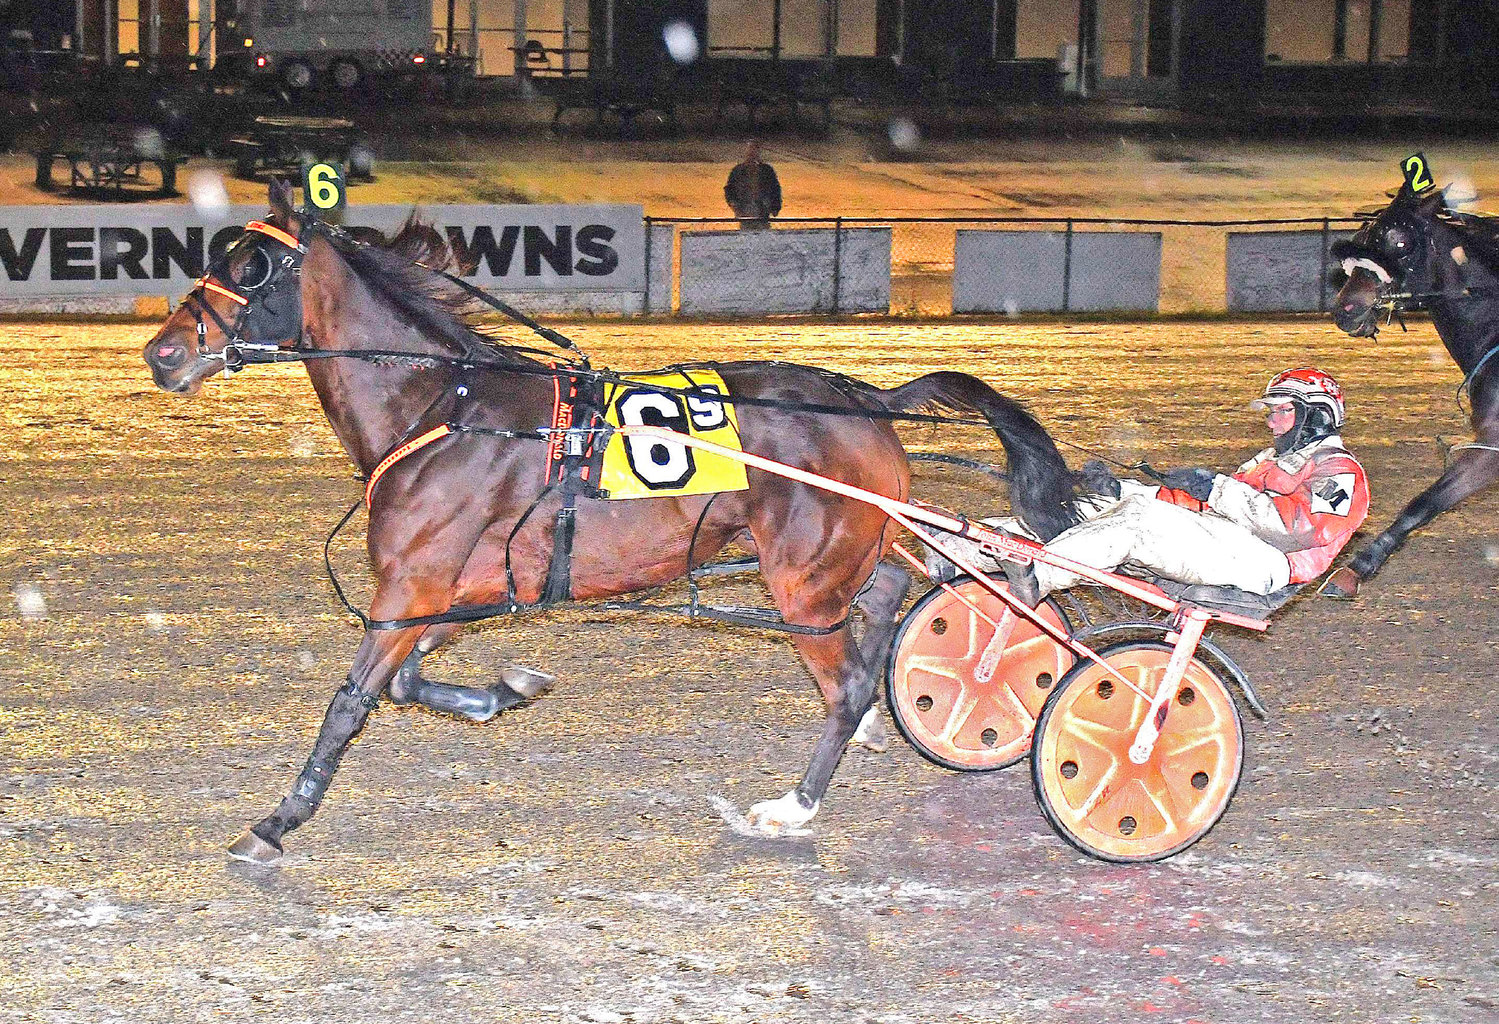 Sgt Papa Daddy won his sixth race of the season with a victory in the featured $8,700 pace Saturday at Vernon Downs.